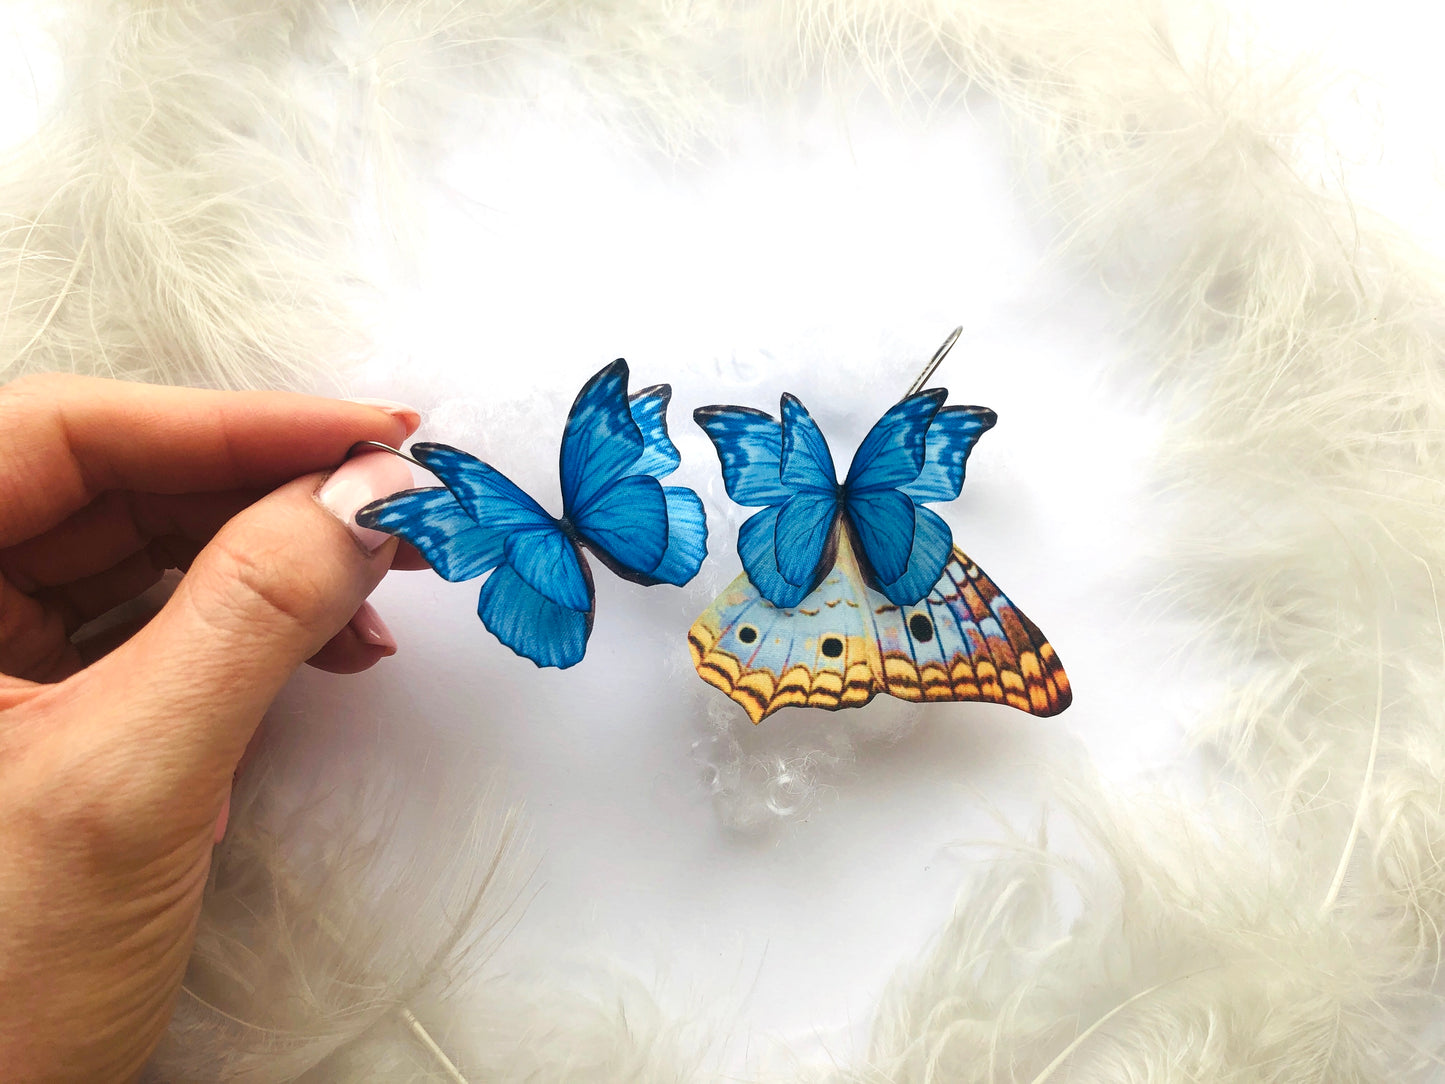 Mismatched Alt Earrings with Blue Butterfly